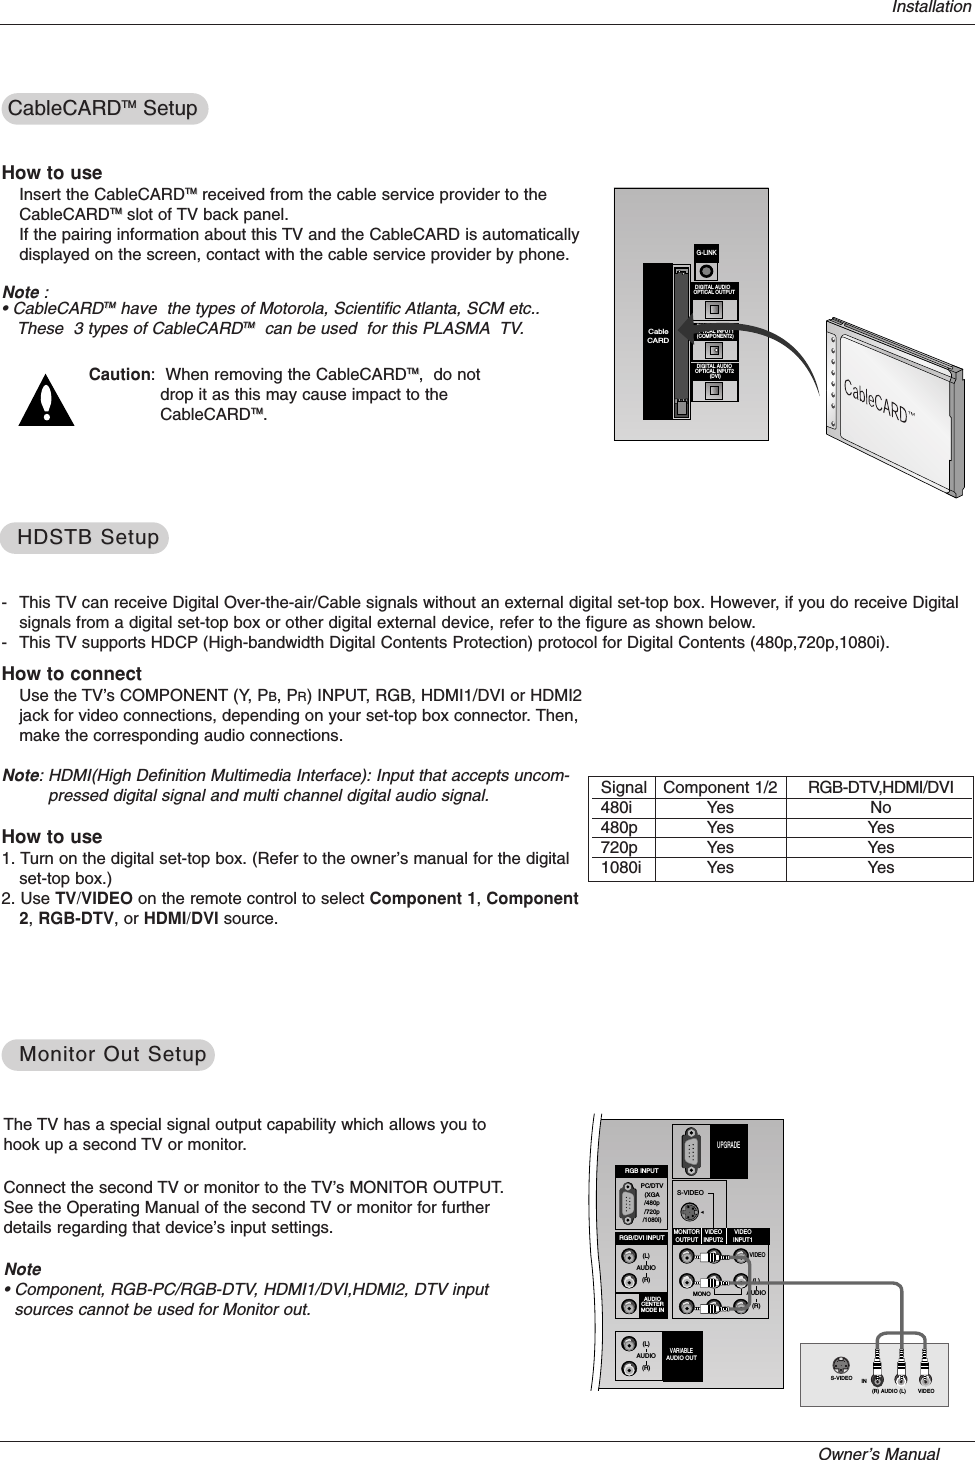 Owner’s Manual   InstallationThe TV has a special signal output capability which allows you tohook up a second TV or monitor.Connect the second TV or monitor to the TV’s MONITOR OUTPUT.See the Operating Manual of the second TV or monitor for furtherdetails regarding that device’s input settings.Note• Component, RGB-PC/RGB-DTV, HDMI1/DVI,HDMI2, DTV inputsources cannot be used for Monitor out.Monitor Out SetupMonitor Out SetupS-VIDEO IN(R) AUDIO (L) VIDEOPC/DTV(XGA/480p/720p/1080i)S-VIDEOMONORGB INPUTRGB/DVI INPUT(L)(R)AUDIO(L)(R)AUDIOVIDEO(L)(R)AUDIOAUDIOCENTERMODE INMONITOROUTPUTVIDEOINPUT2VIDEOINPUT1VARIABLEAUDIO OUTUPGRADEHow to connectUse the TV’s COMPONENT (Y, PB, PR) INPUT, RGB, HDMI1/DVI or HDMI2jack for video connections, depending on your set-top box connector. Then,make the corresponding audio connections.Note: HDMI(High Definition Multimedia Interface): Input that accepts uncom-pressed digital signal and multi channel digital audio signal.How to use1. Turn on the digital set-top box. (Refer to the owner’s manual for the digitalset-top box.) 2. Use TV/VIDEO on the remote control to select Component 1, Component2, RGB-DTV, or HDMI/DVI source.HDSTB SetupHDSTB Setup- This TV can receive Digital Over-the-air/Cable signals without an external digital set-top box. However, if you do receive Digitalsignals from a digital set-top box or other digital external device, refer to the figure as shown below.- This TV supports HDCP (High-bandwidth Digital Contents Protection) protocol for Digital Contents (480p,720p,1080i).Signal480i480p720p1080iComponent 1/2YesYesYesYesRGB-DTV,HDMI/DVINoYesYesYesCableCARDCableCARDTMTM SetupSetupDIGITAL AUDIOOPTICAL INPUT1(COMPONENT2)DIGITAL AUDIOOPTICAL INPUT2(DVI)DIGITAL AUDIO OPTICAL OUTPUTCableCARDG-LINKHow to useInsert the CableCARDTMTM received from the cable service provider to theCableCARDTMTM slot of TV back panel. If the pairing information about this TV and the CableCARD is automaticallydisplayed on the screen, contact with the cable service provider by phone.Note :• CableCARDTMTM have  the types of Motorola, Scientific Atlanta, SCM etc..These  3 types of CableCARDTMTM can be used  for this PLASMA TV.Caution:  When removing the CableCARDTMTM,  do notdrop it as this may cause impact to theCableCARDTMTM.